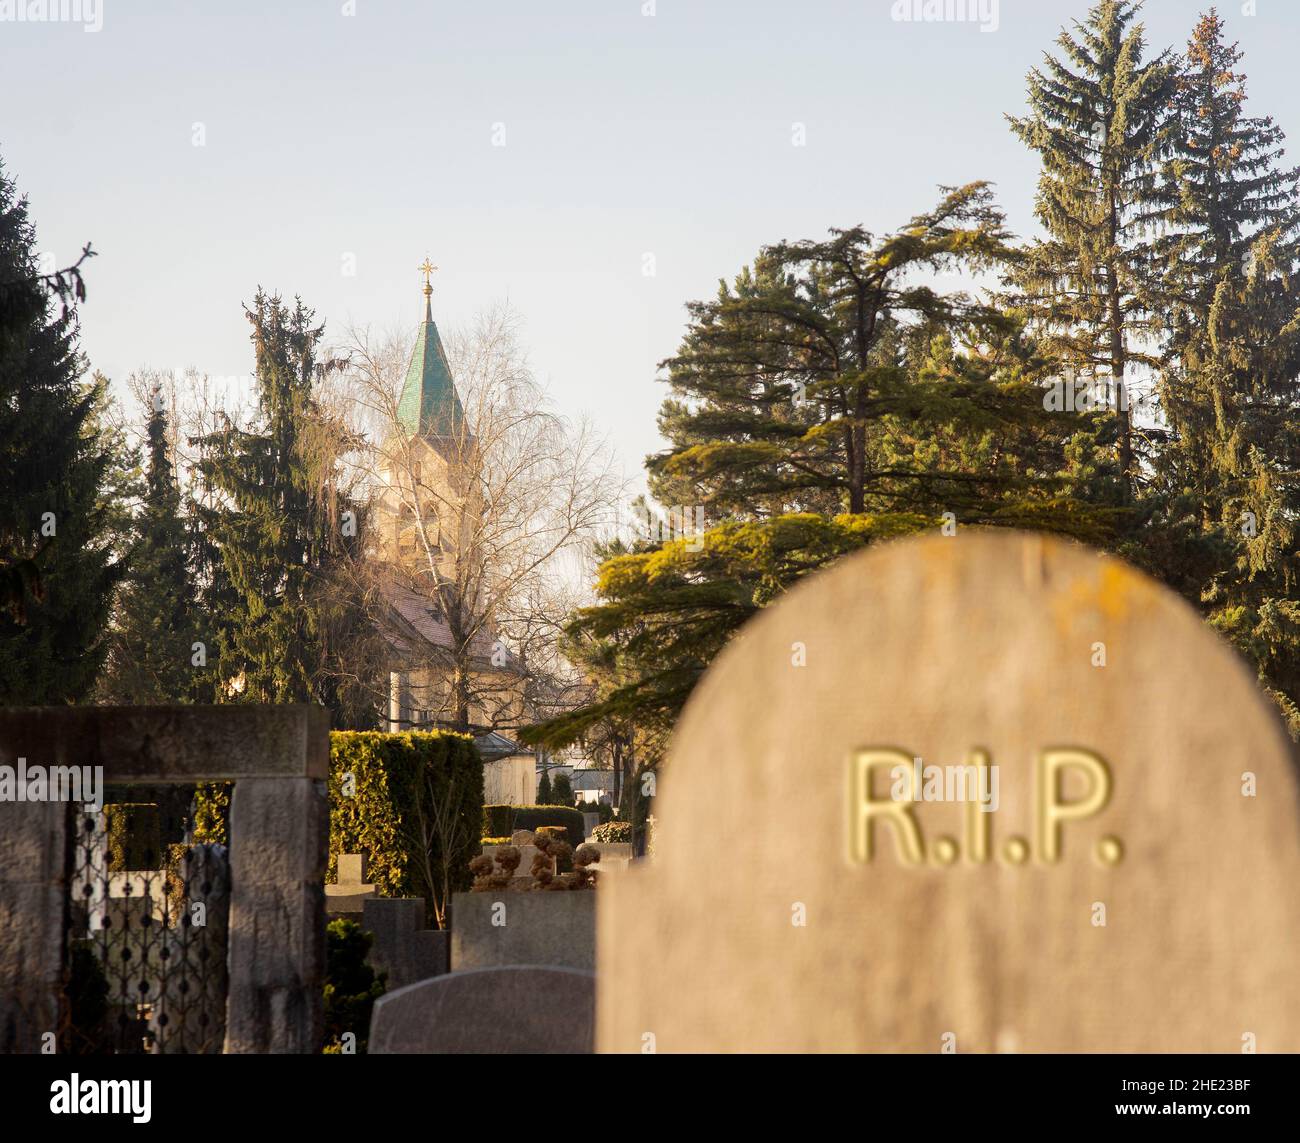 Gravestone with blurred rip sign with church in the cemetary distance. Stock Photo